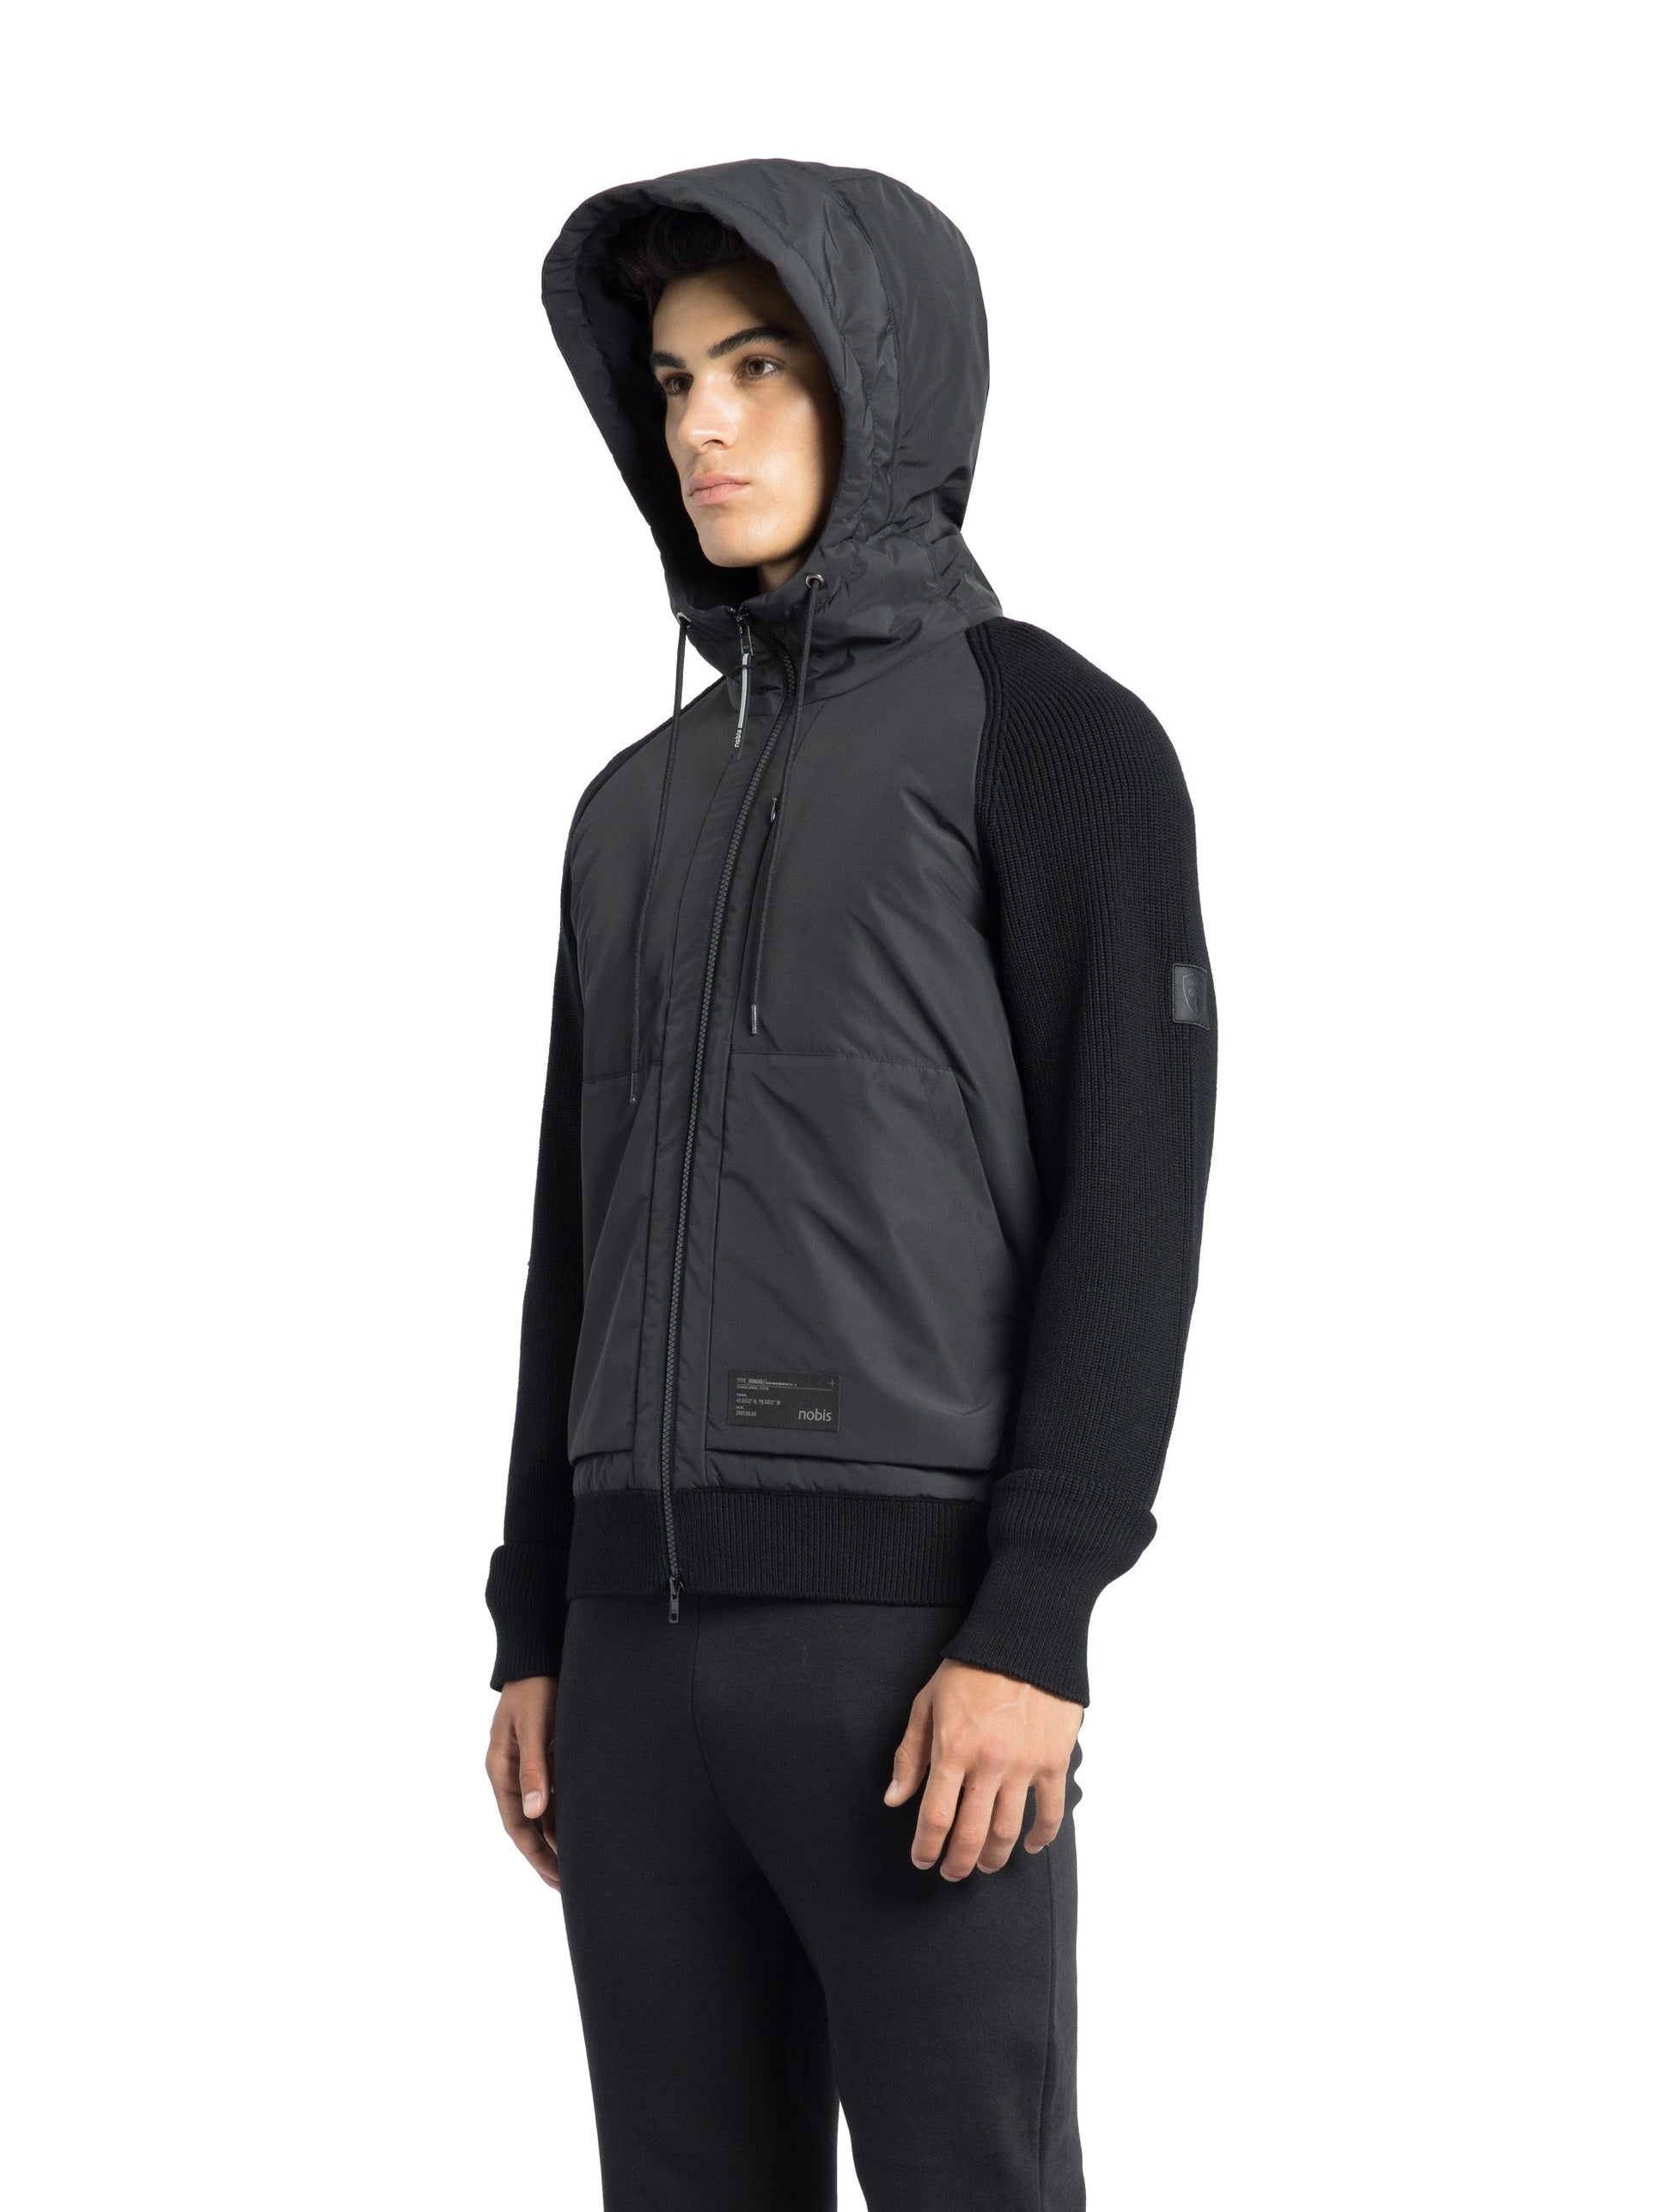 Hedge Men's Performance Hoodie in hip length, premium 3-ply micro denier and 100% virgin extra fine merino wool knit fabrication, Primaloft Gold Insulation Active+, non-removable hood with adjustable drawstrings, two-way centre-front zipper, magnetic closure side-entry pockets at waist, in Black